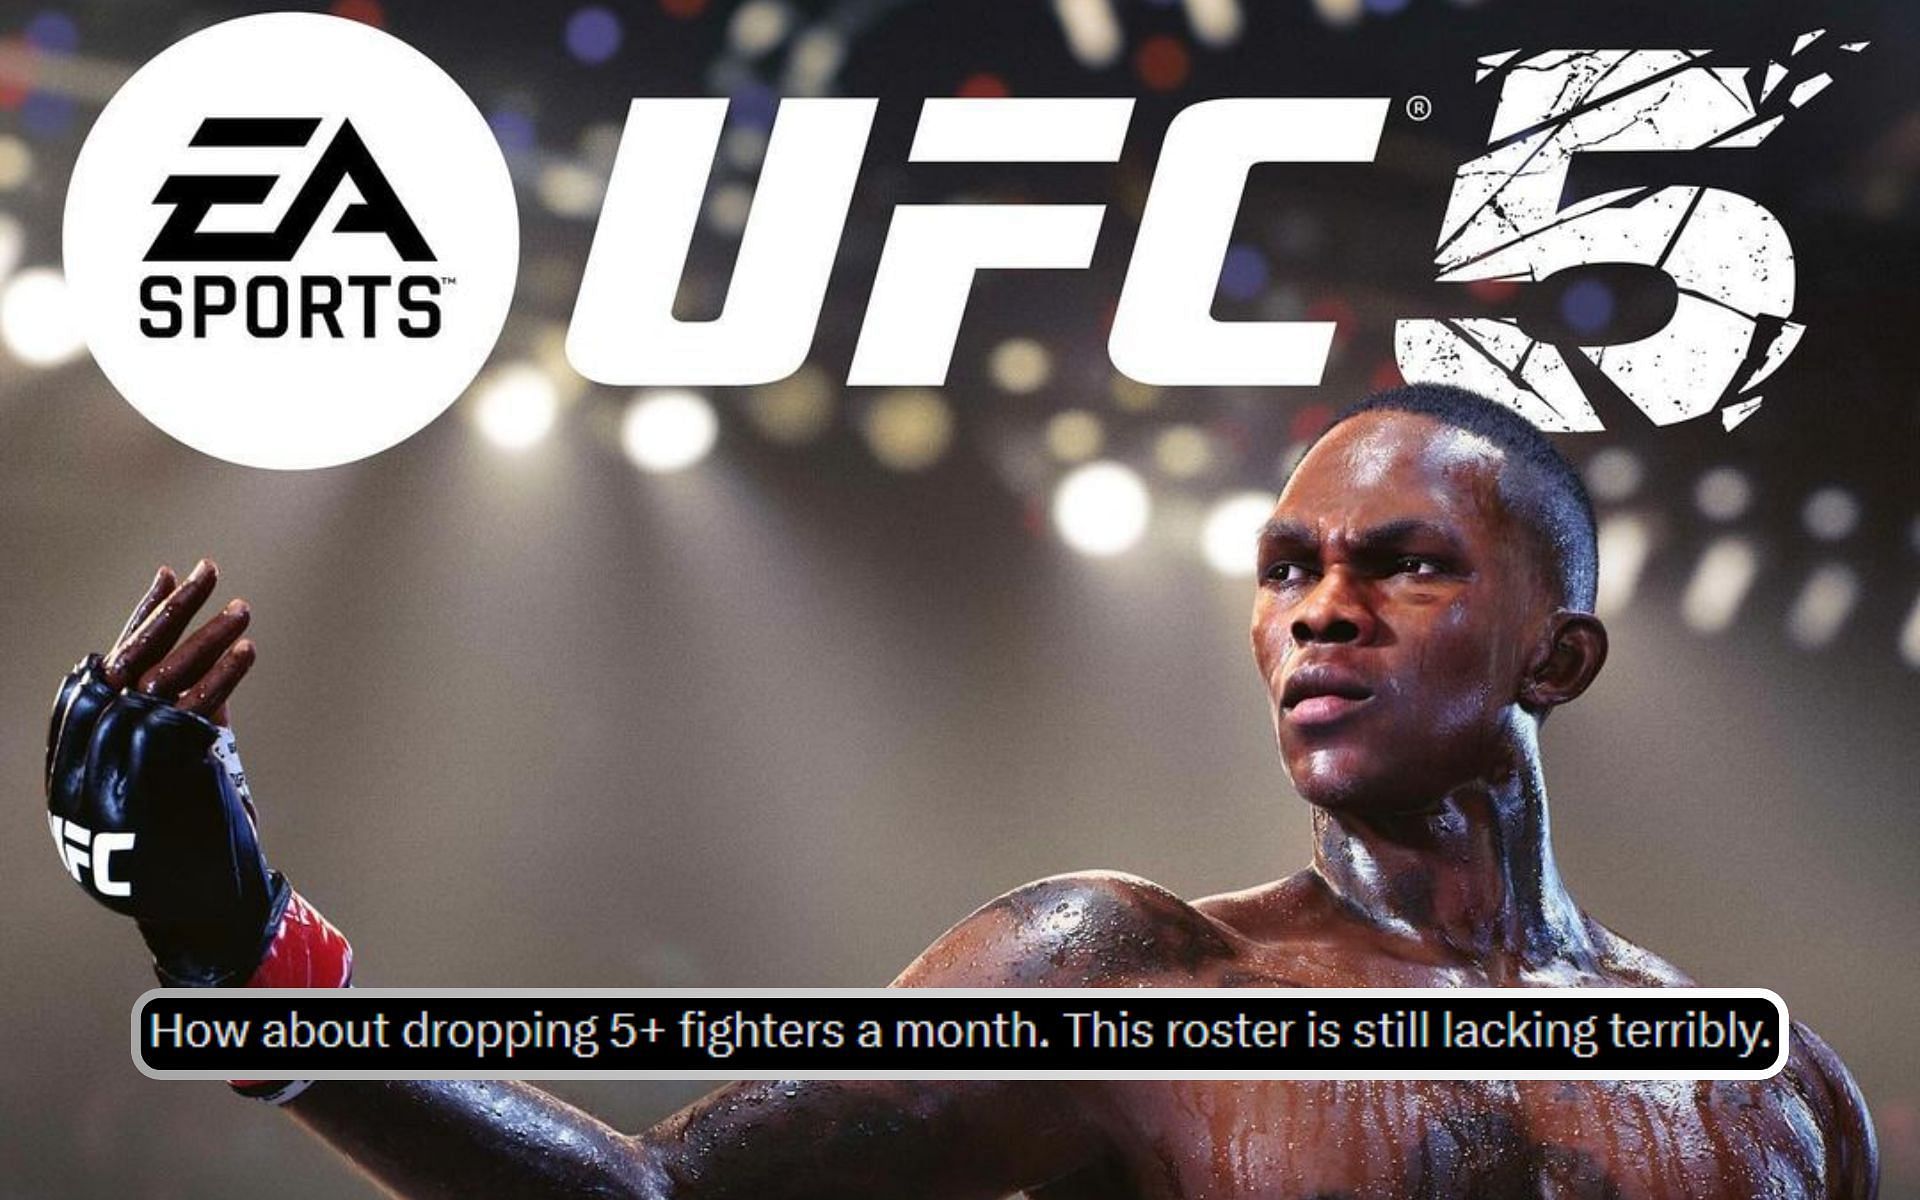 EA Sports UFC 5 adds three new fighters in their roster